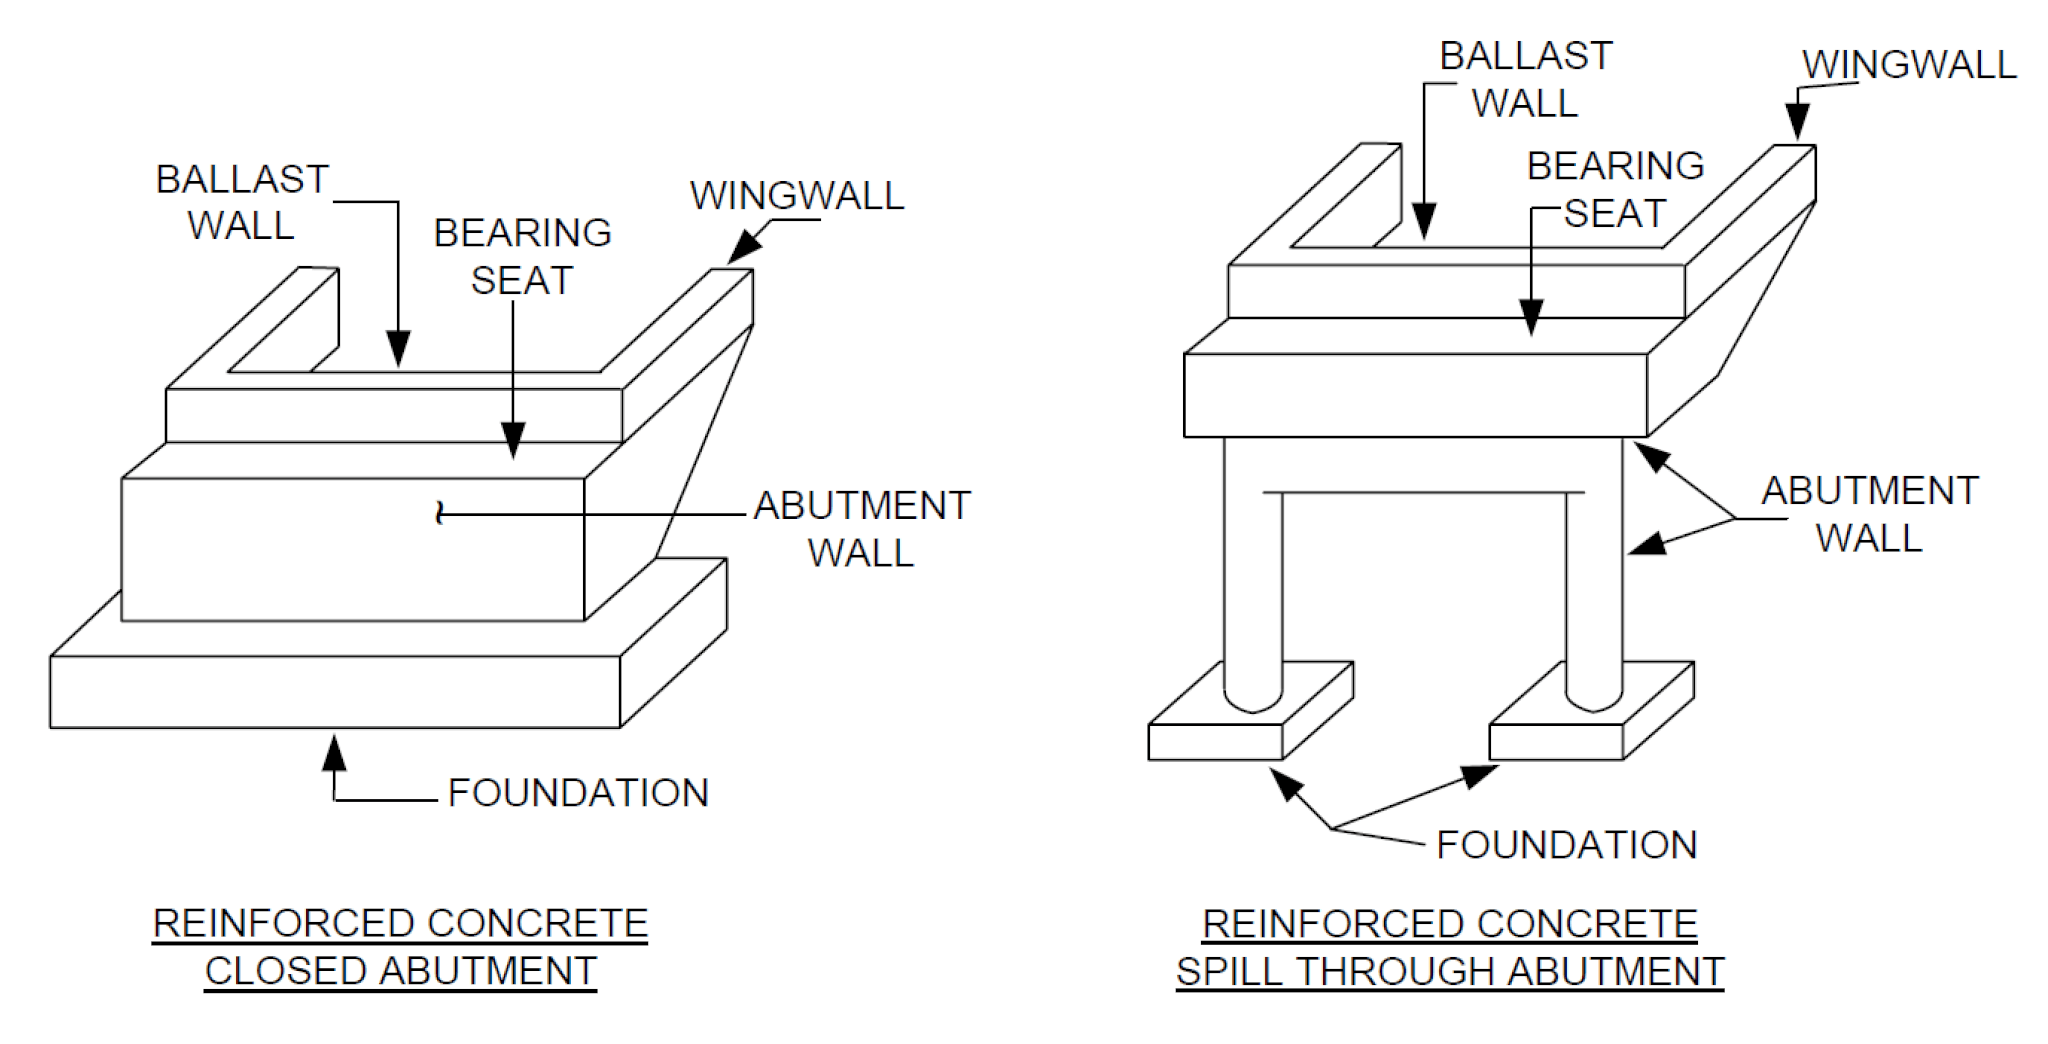 Abutment Walls (Adapted from OSIM 2008